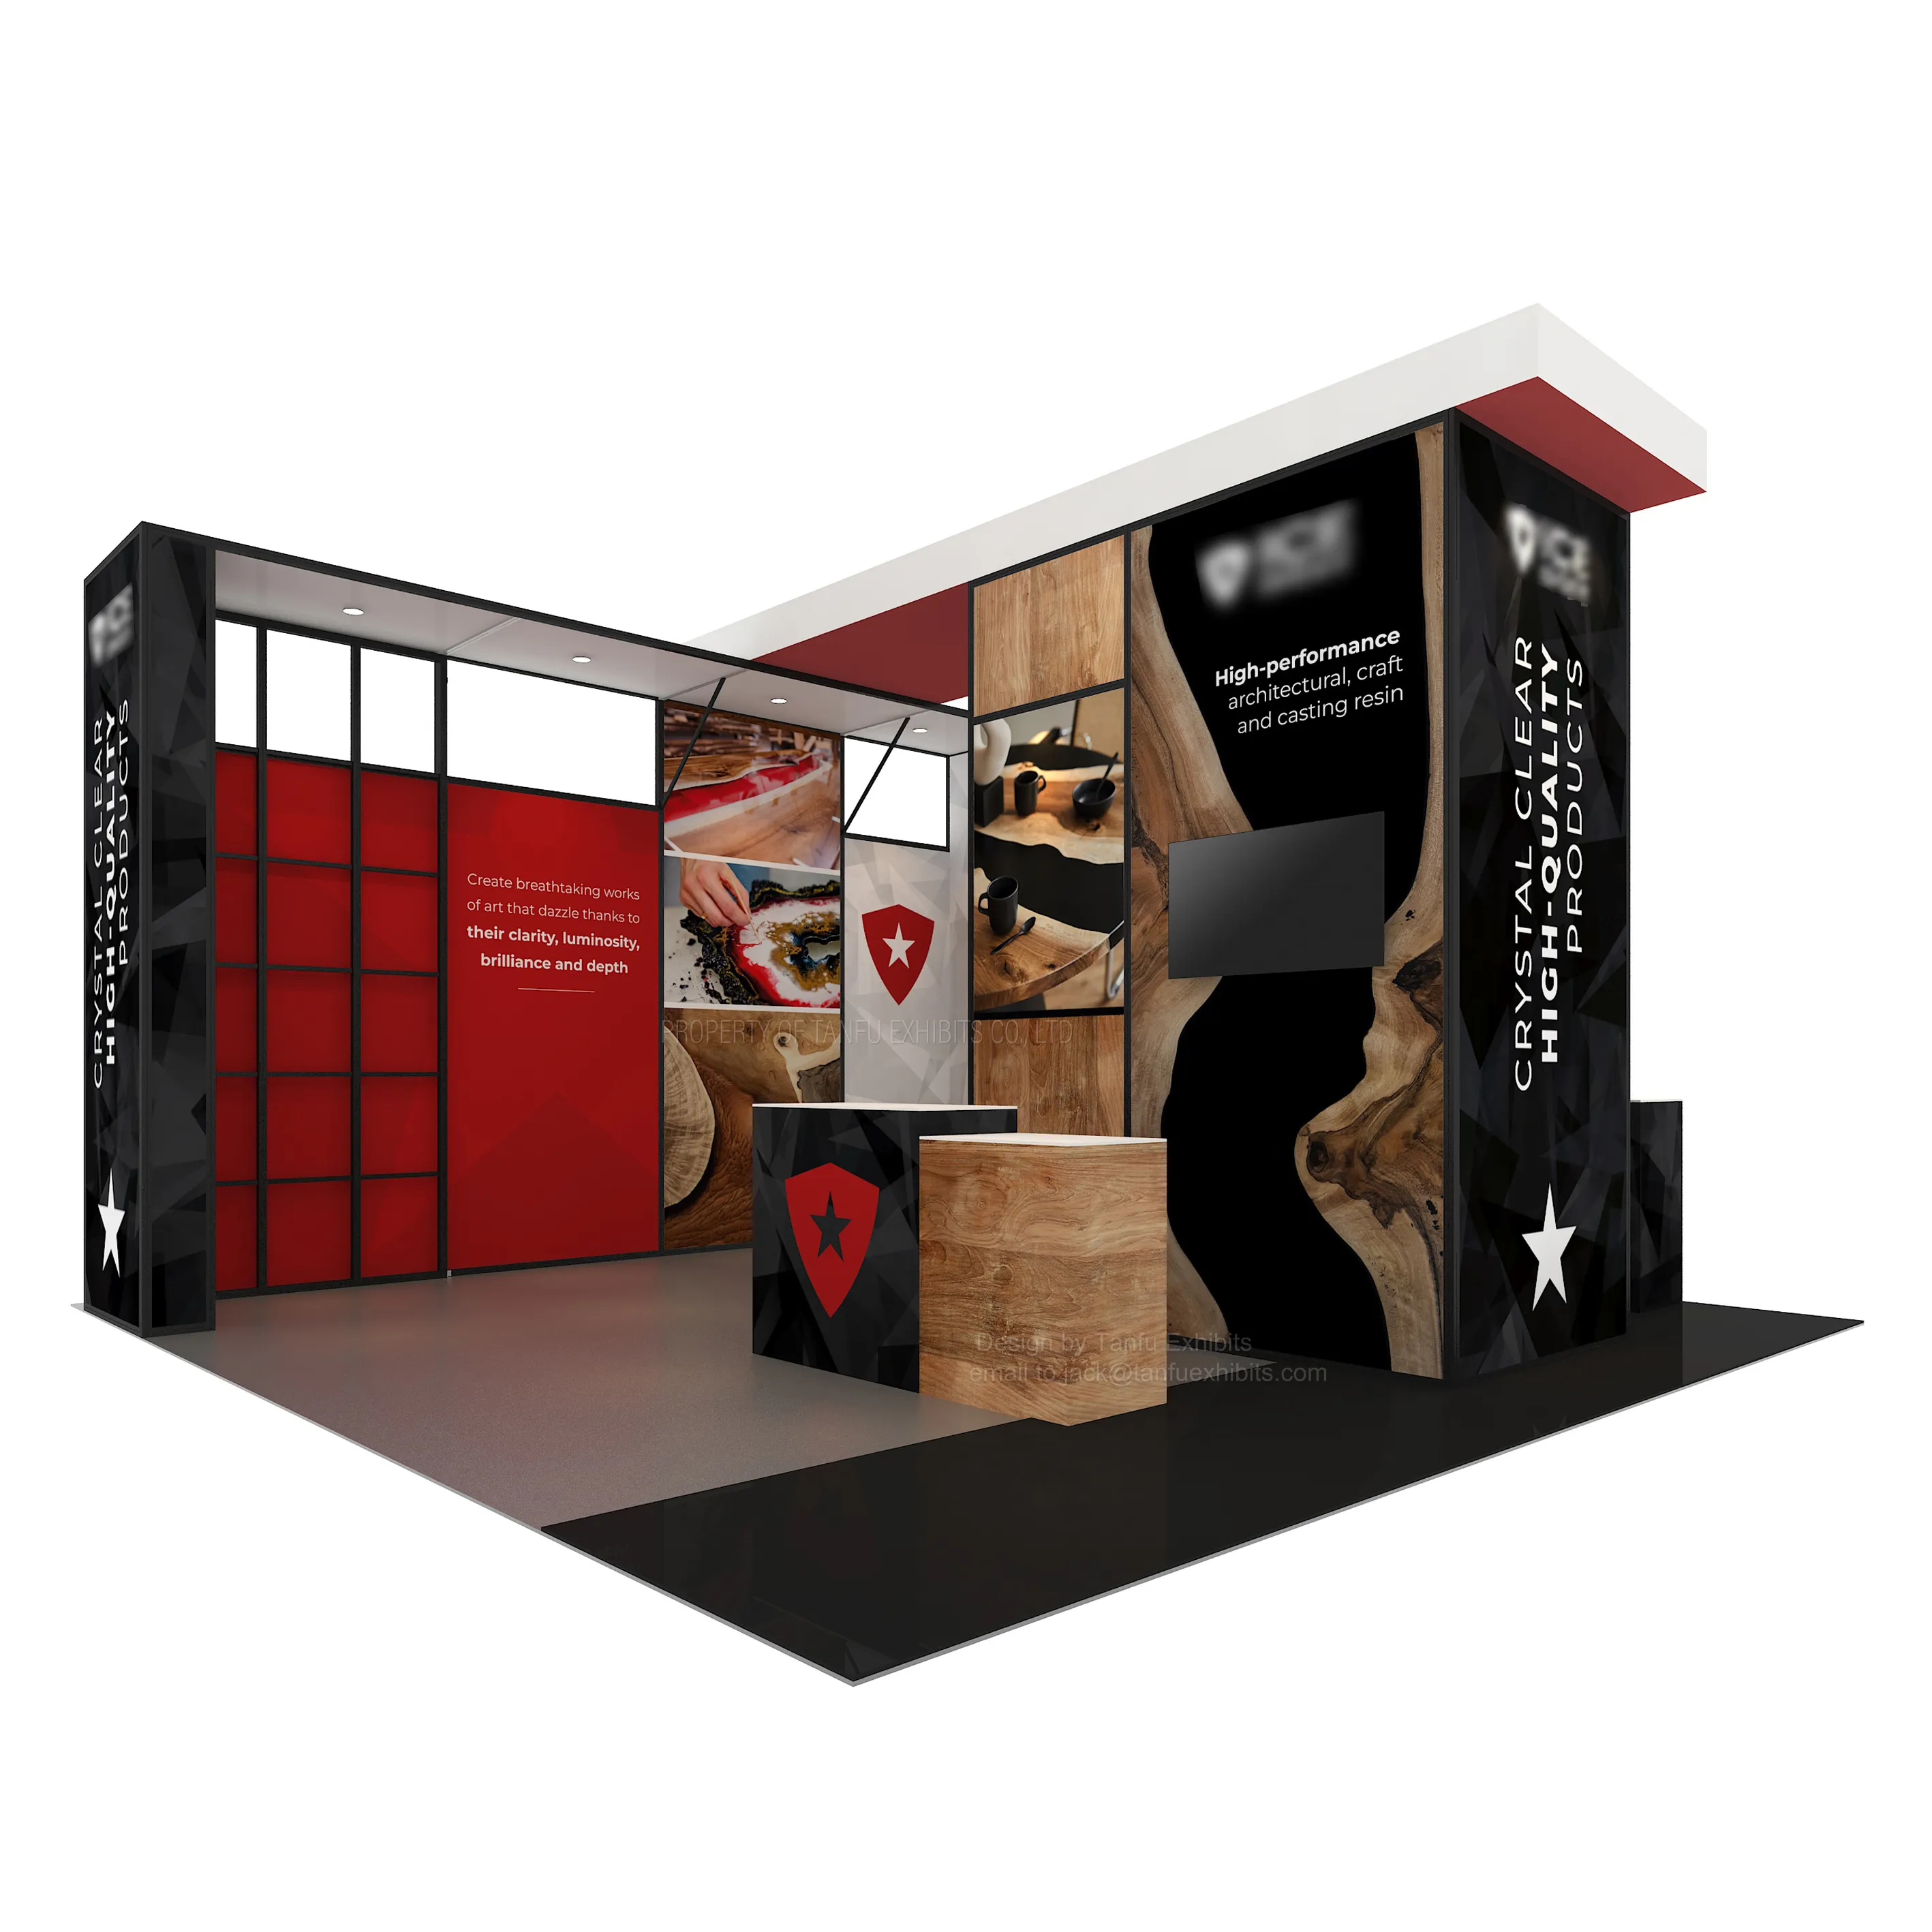 Advertising Lighting Box Trade Exhibition Booth Design with Counter Tension Fabric Backdrop Stand for Expo Trade Show